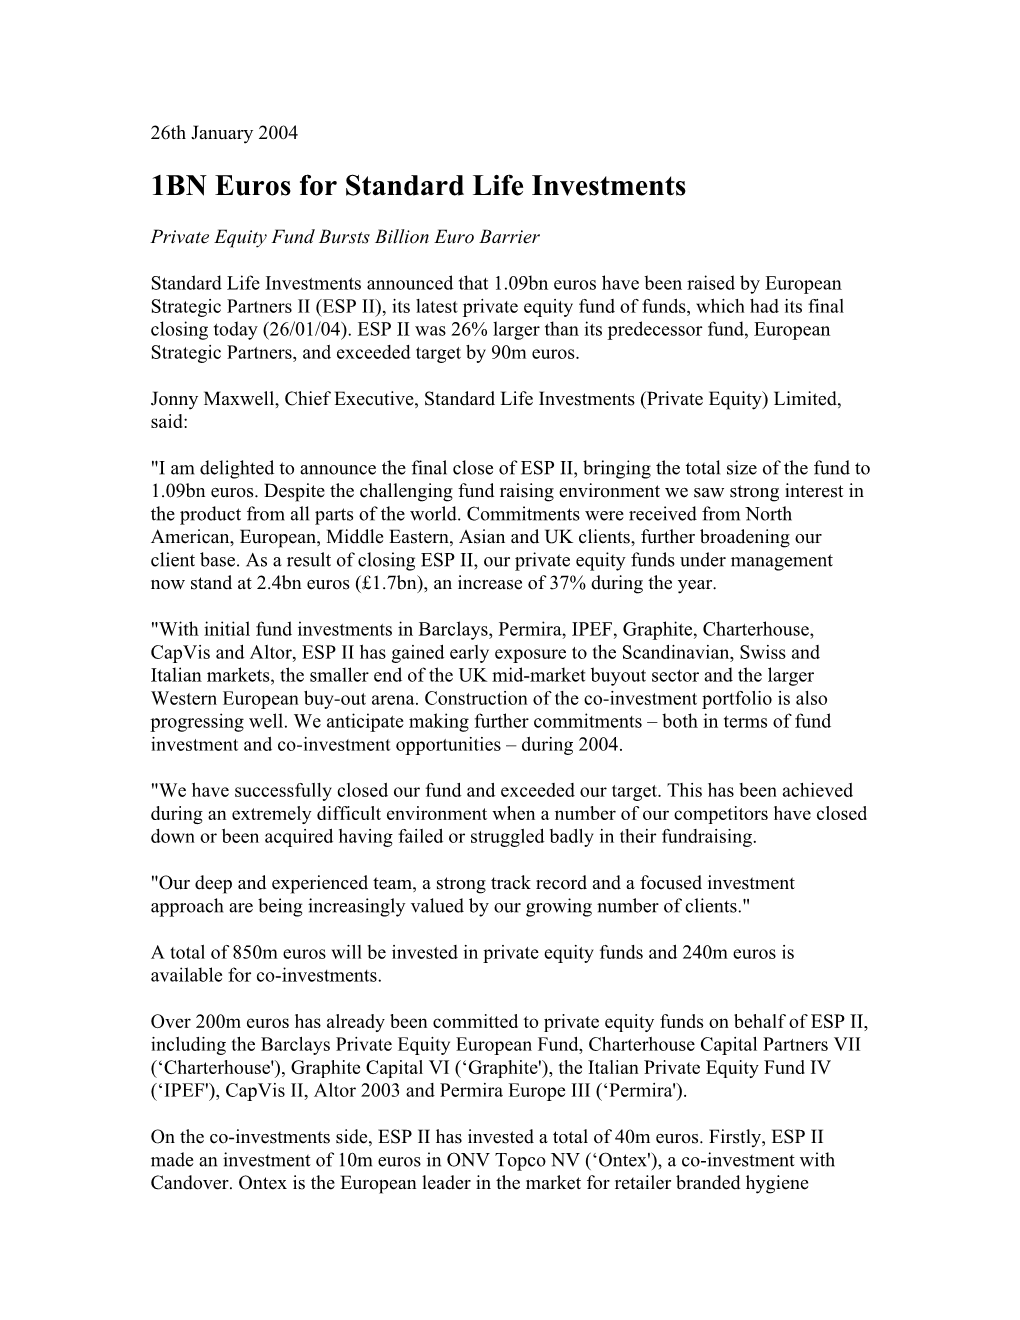 1BN Euros for Standard Life Investments